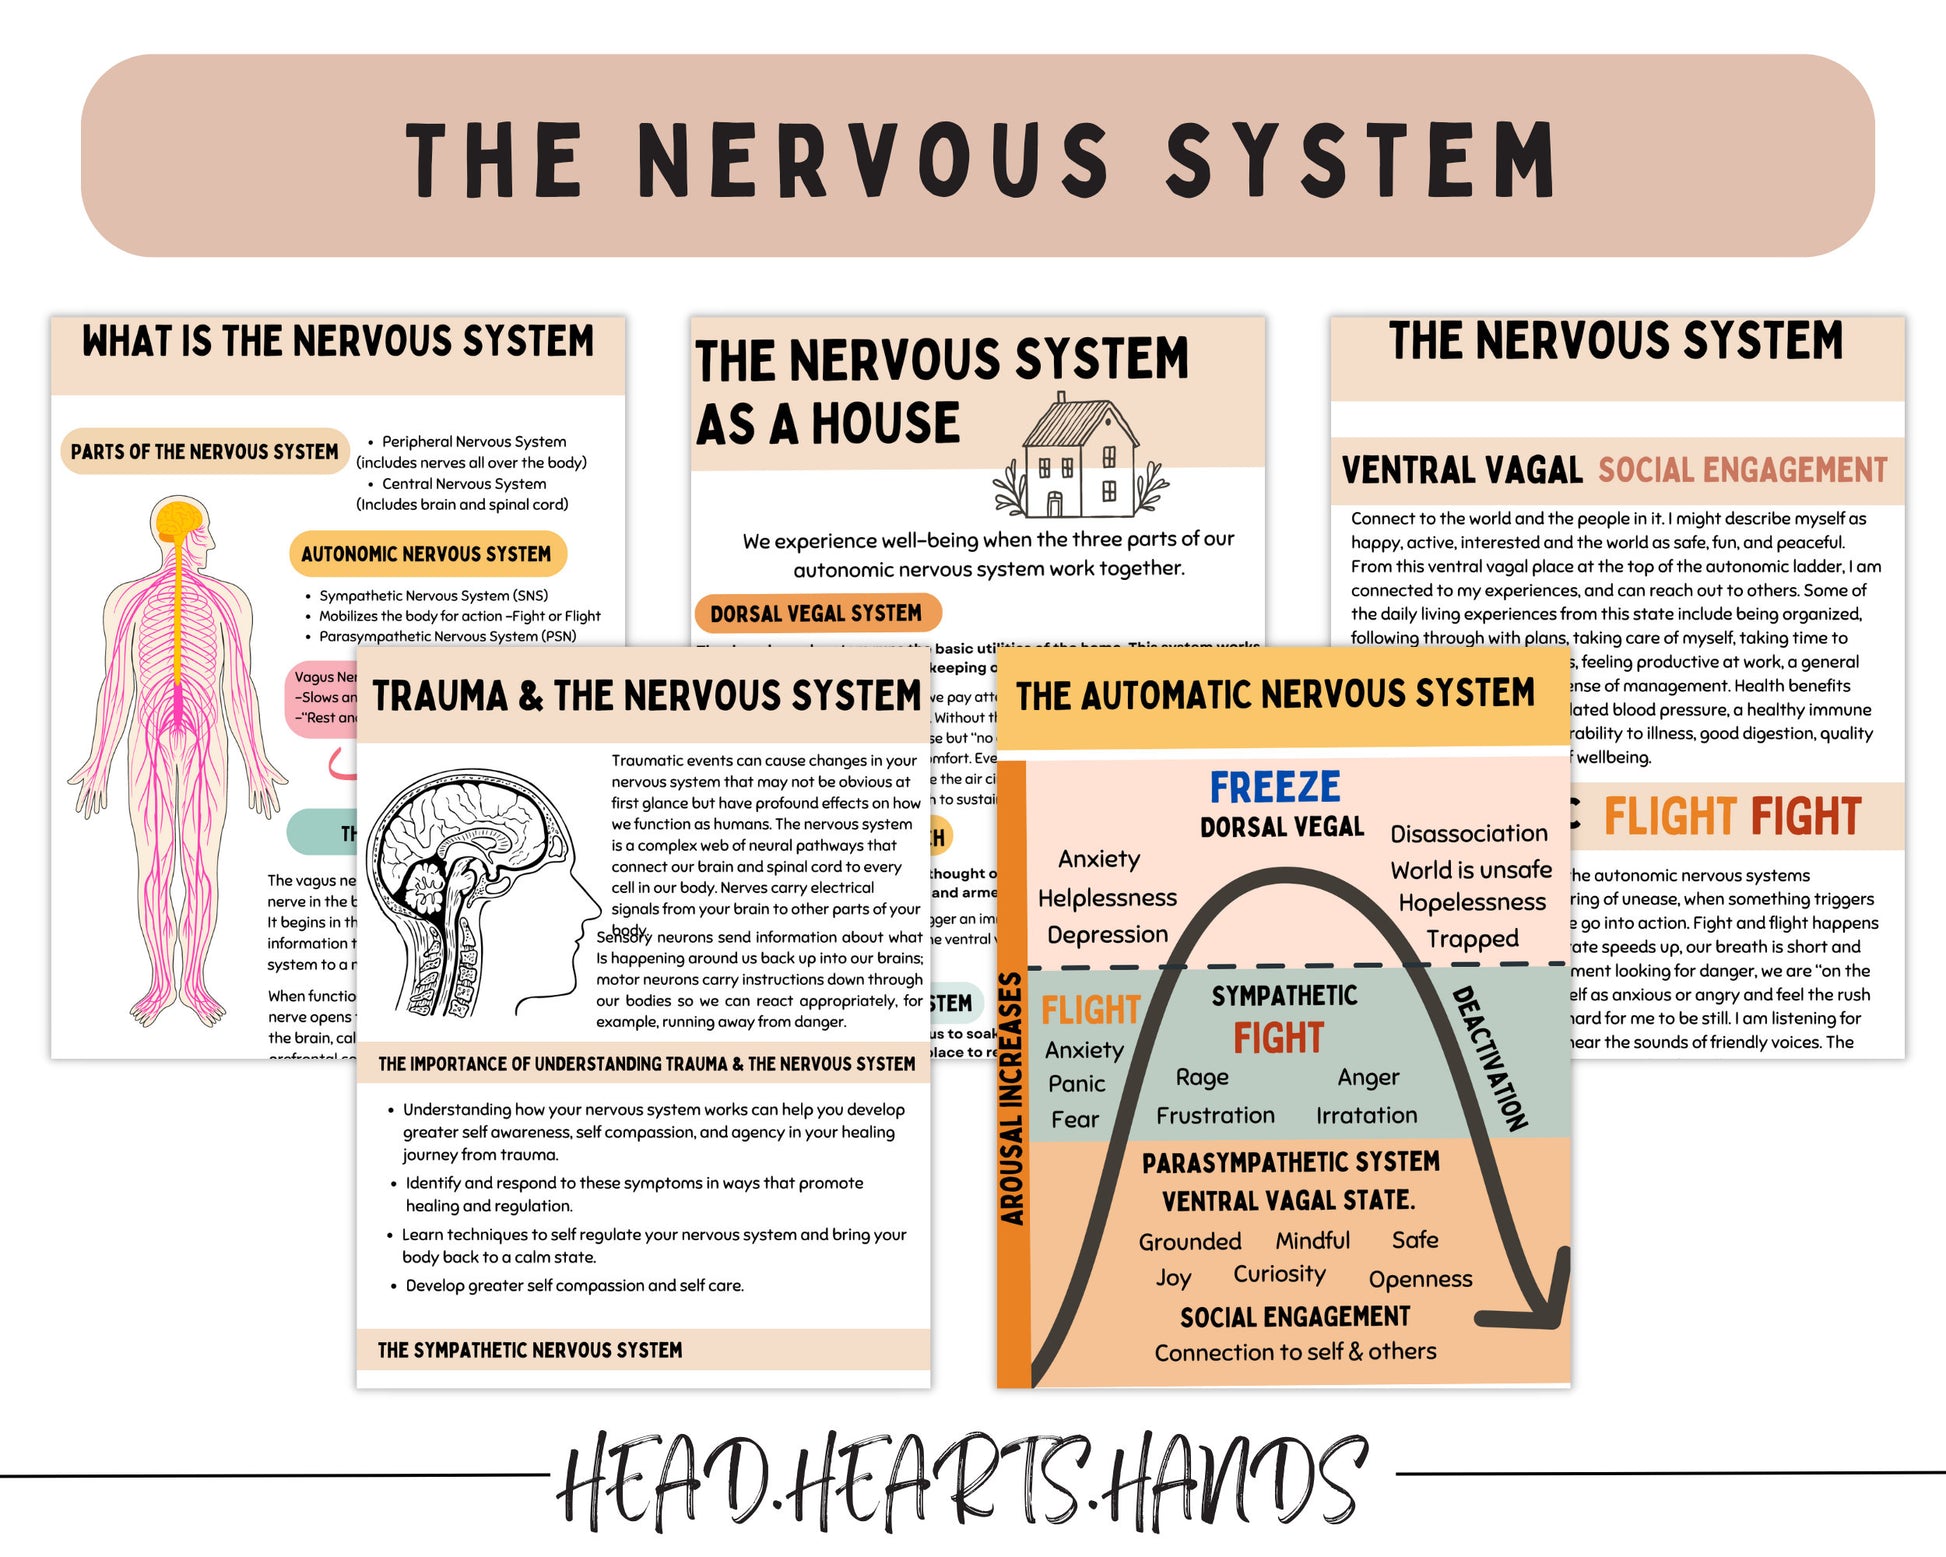 Polyvagal Theory & Nervous System Regulation: Trauma Therapy.